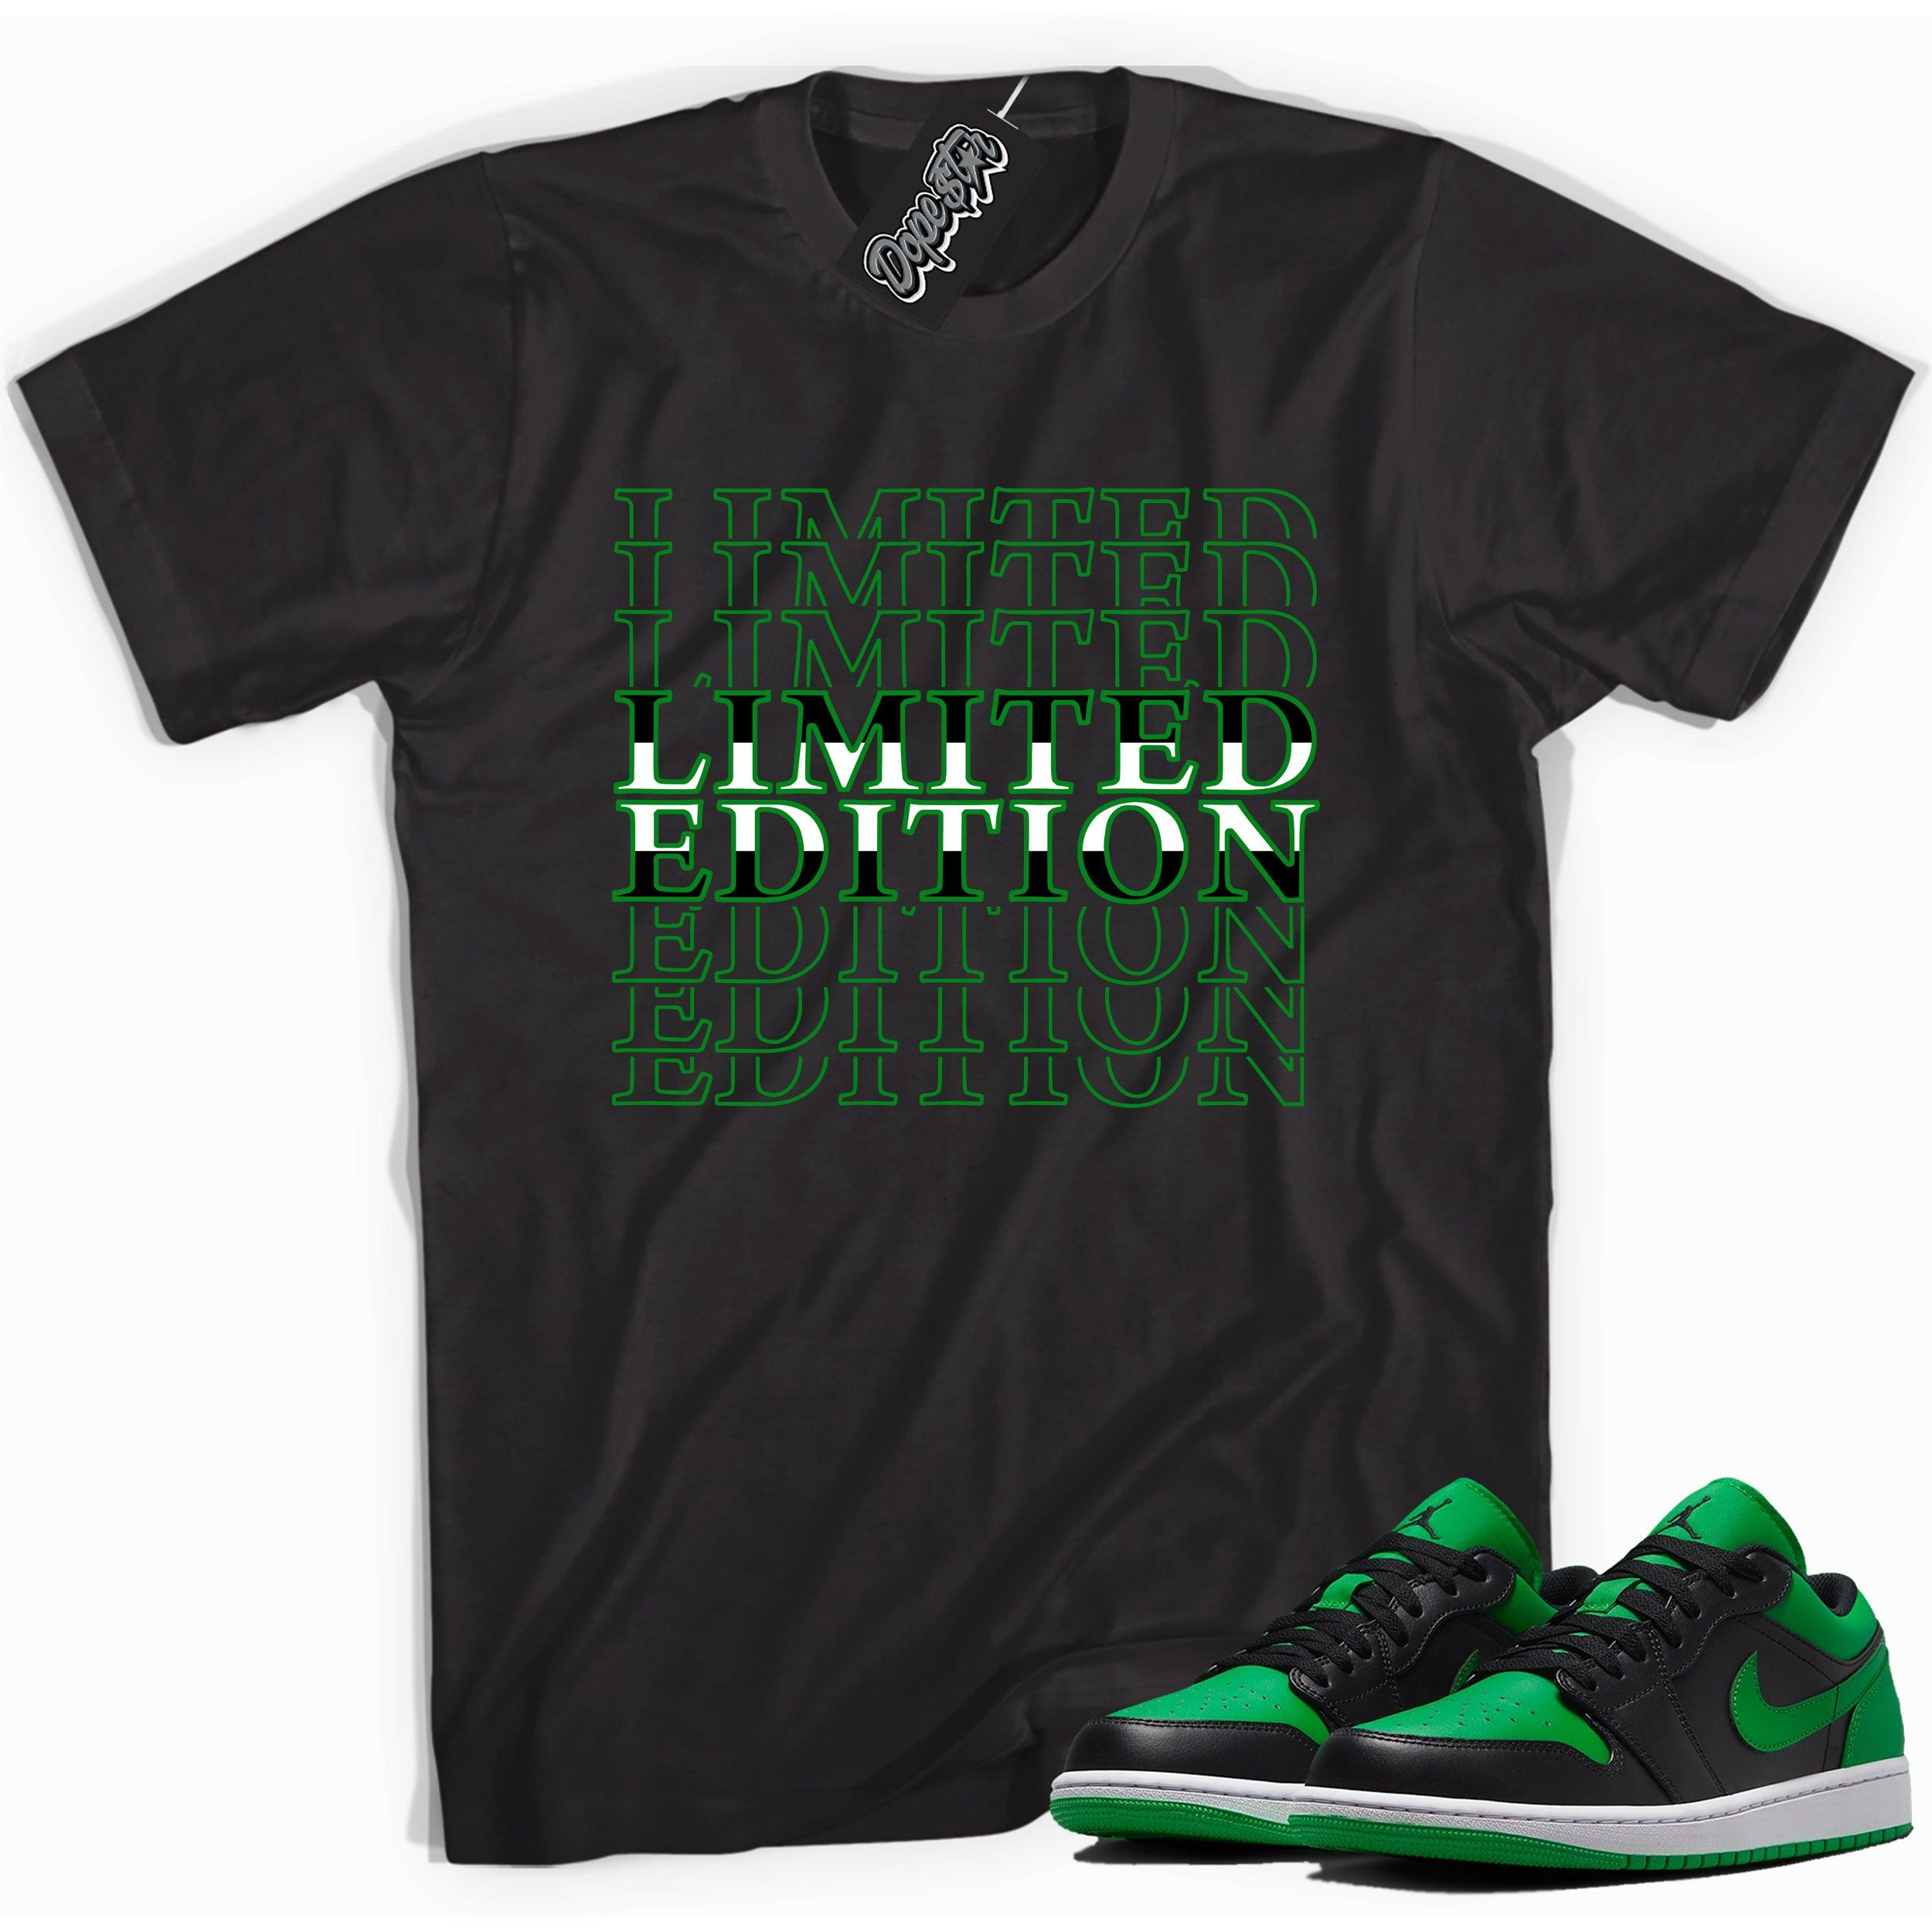 Cool black graphic tee with 'limited edition' print, that perfectly matches Air Jordan 1 Low Lucky Green sneakers